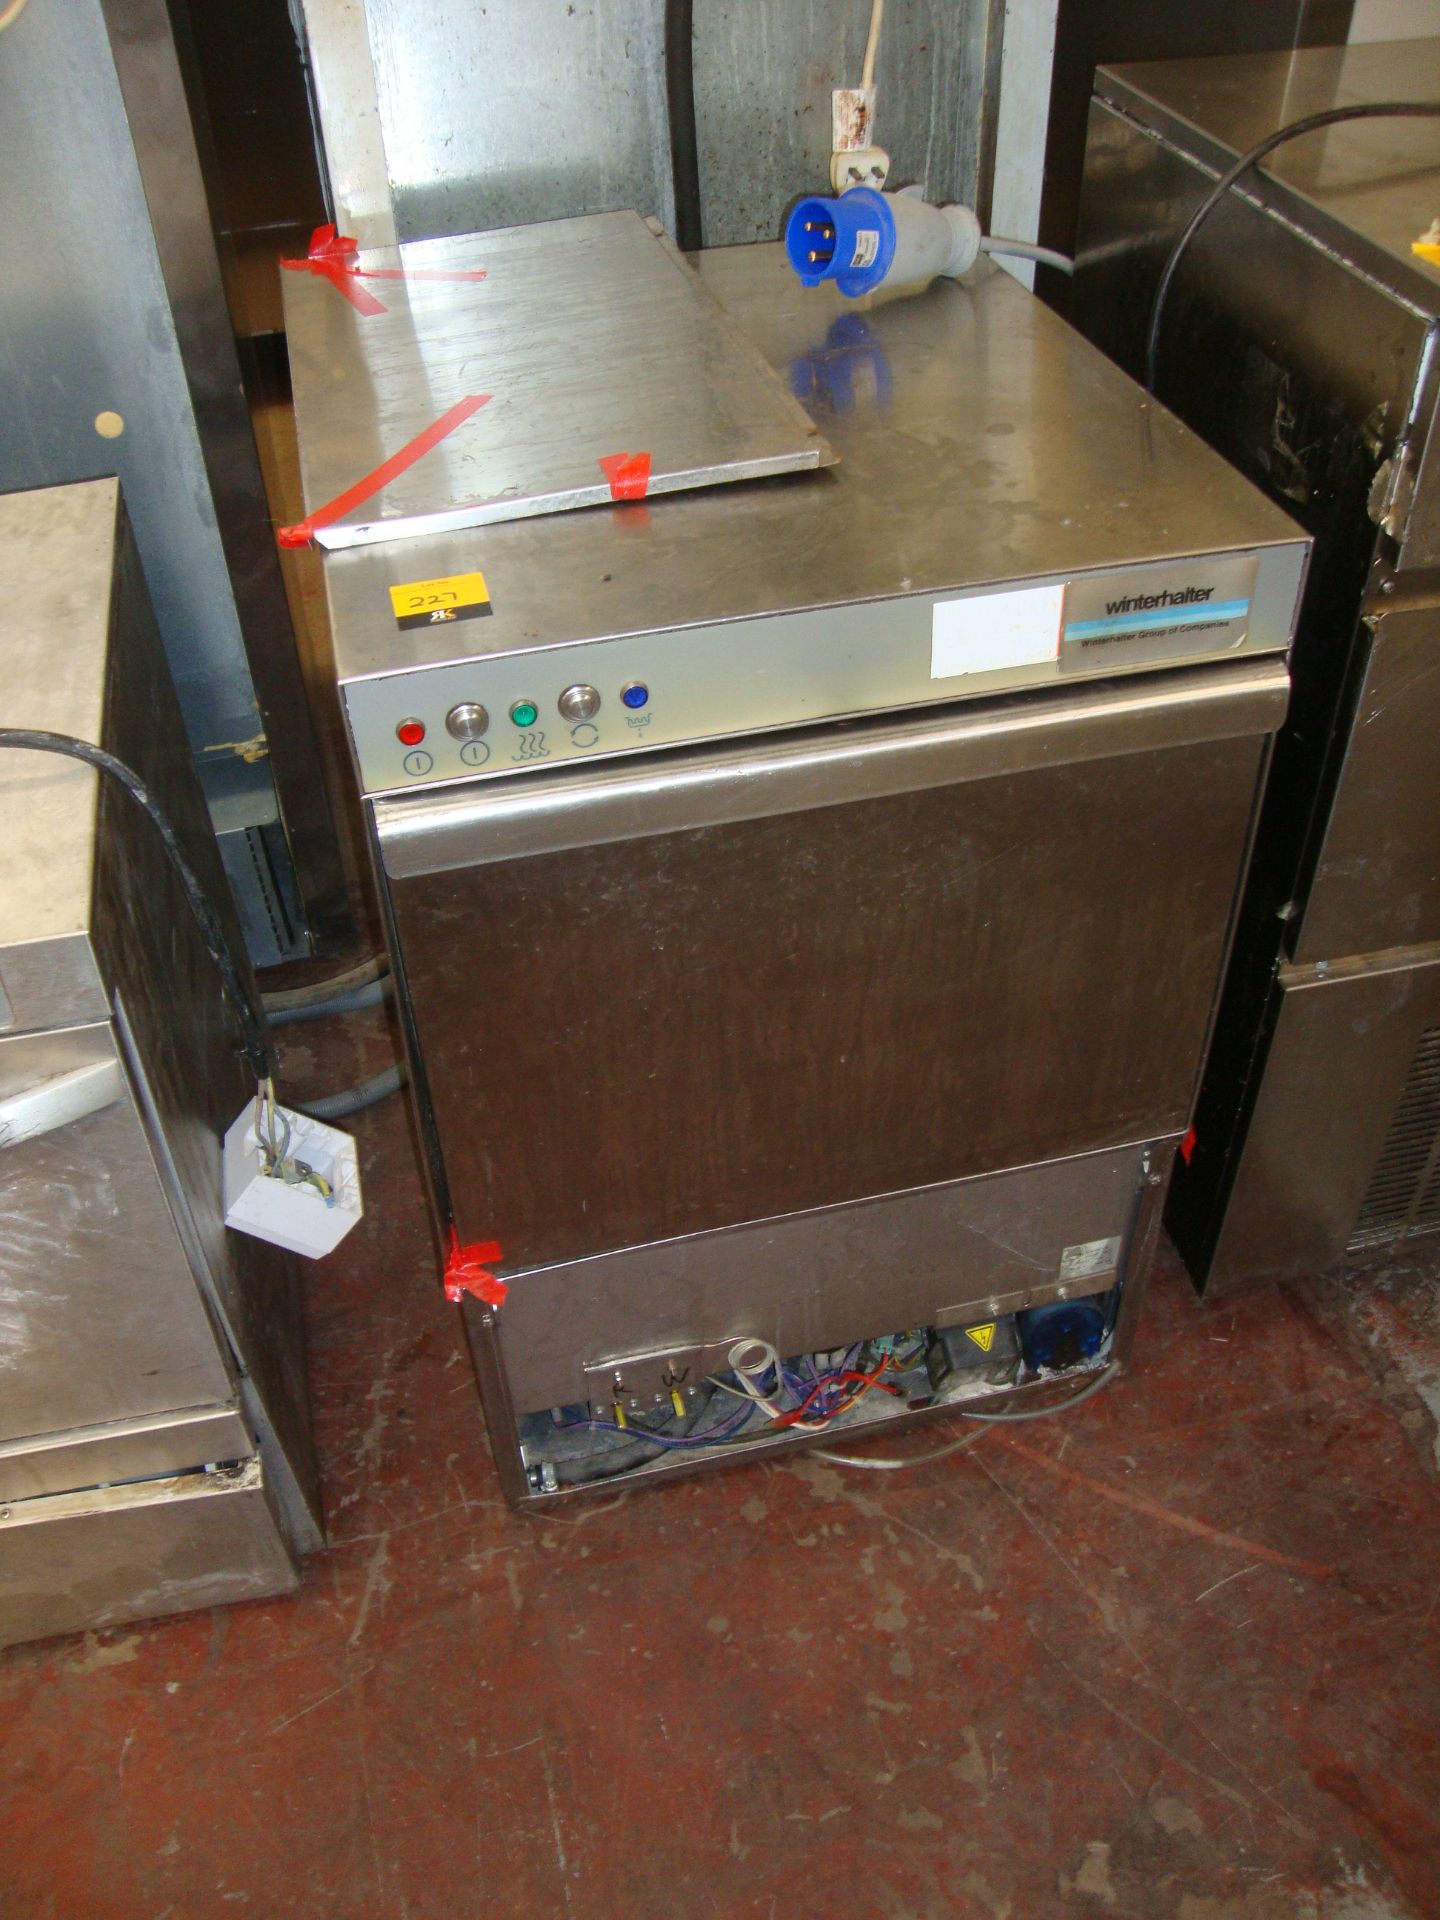 Winterhalter E308-V1 counter height stainless steel glass washer/dishwasher - all faults - Image 4 of 4